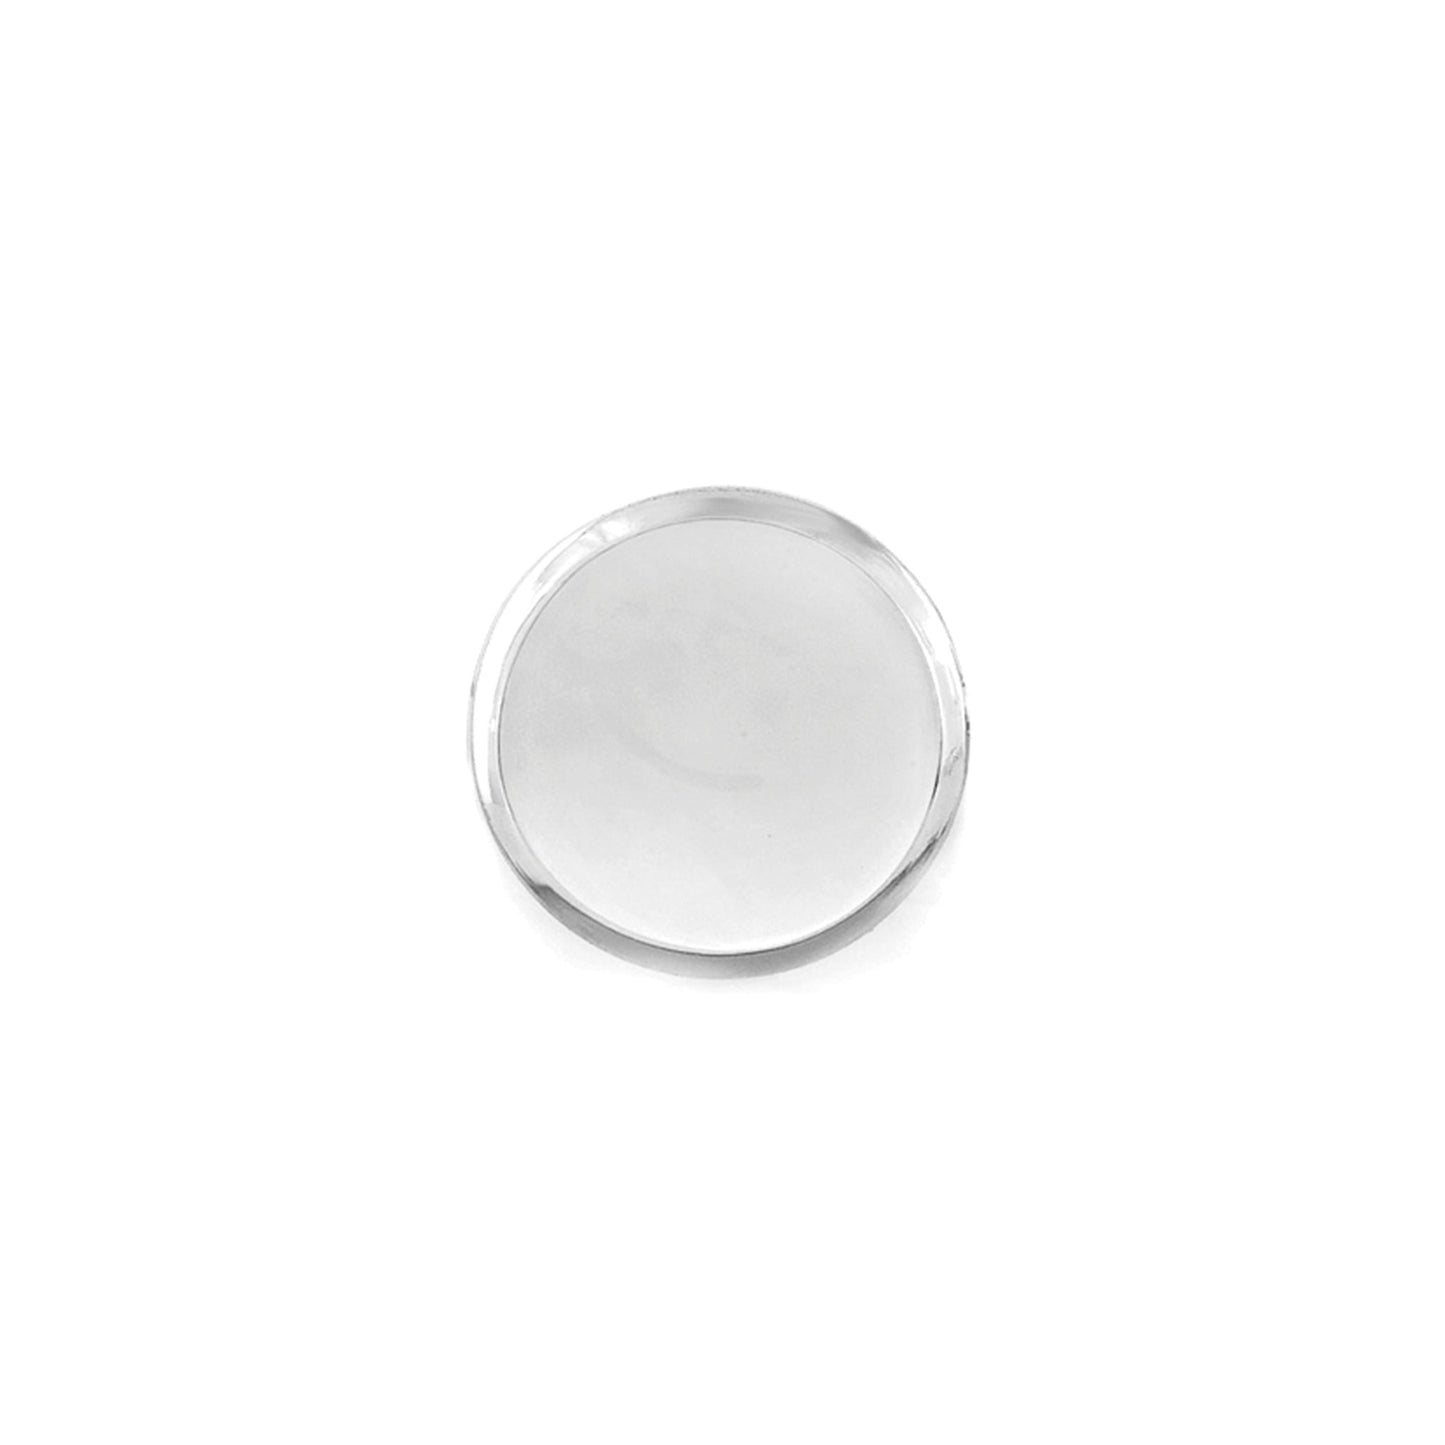 A sterling silver plain polished bevel edge tie tack displayed on a neutral white background.